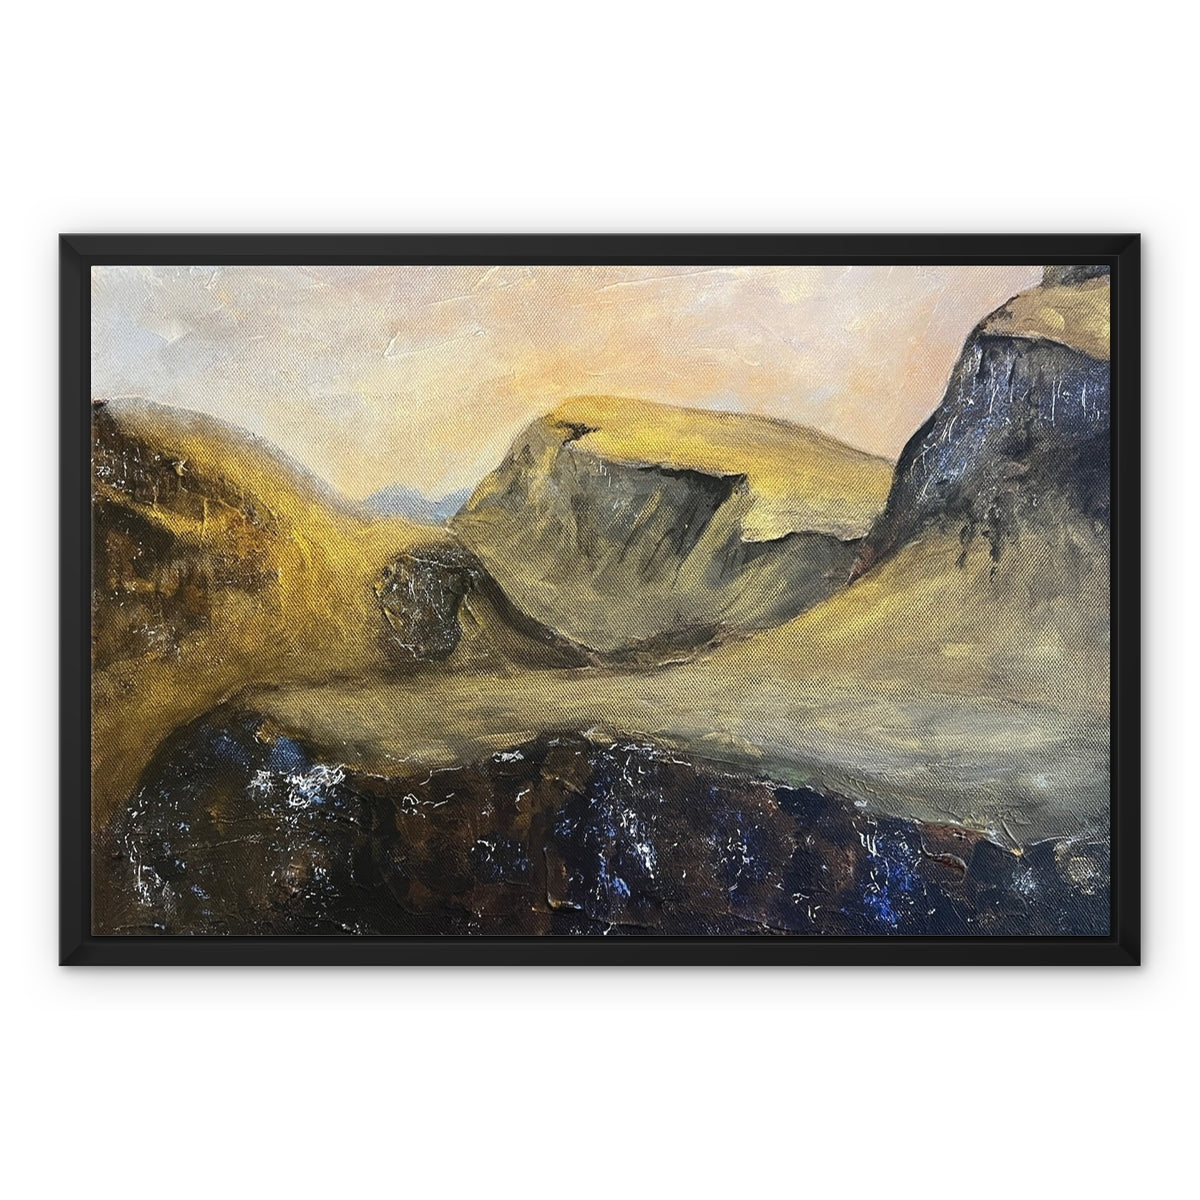 The Quiraing Skye Painting | Framed Canvas-Floating Framed Canvas Prints-Skye Art Gallery-24"x18"-Black Frame-White Wrap-Paintings, Prints, Homeware, Art Gifts From Scotland By Scottish Artist Kevin Hunter